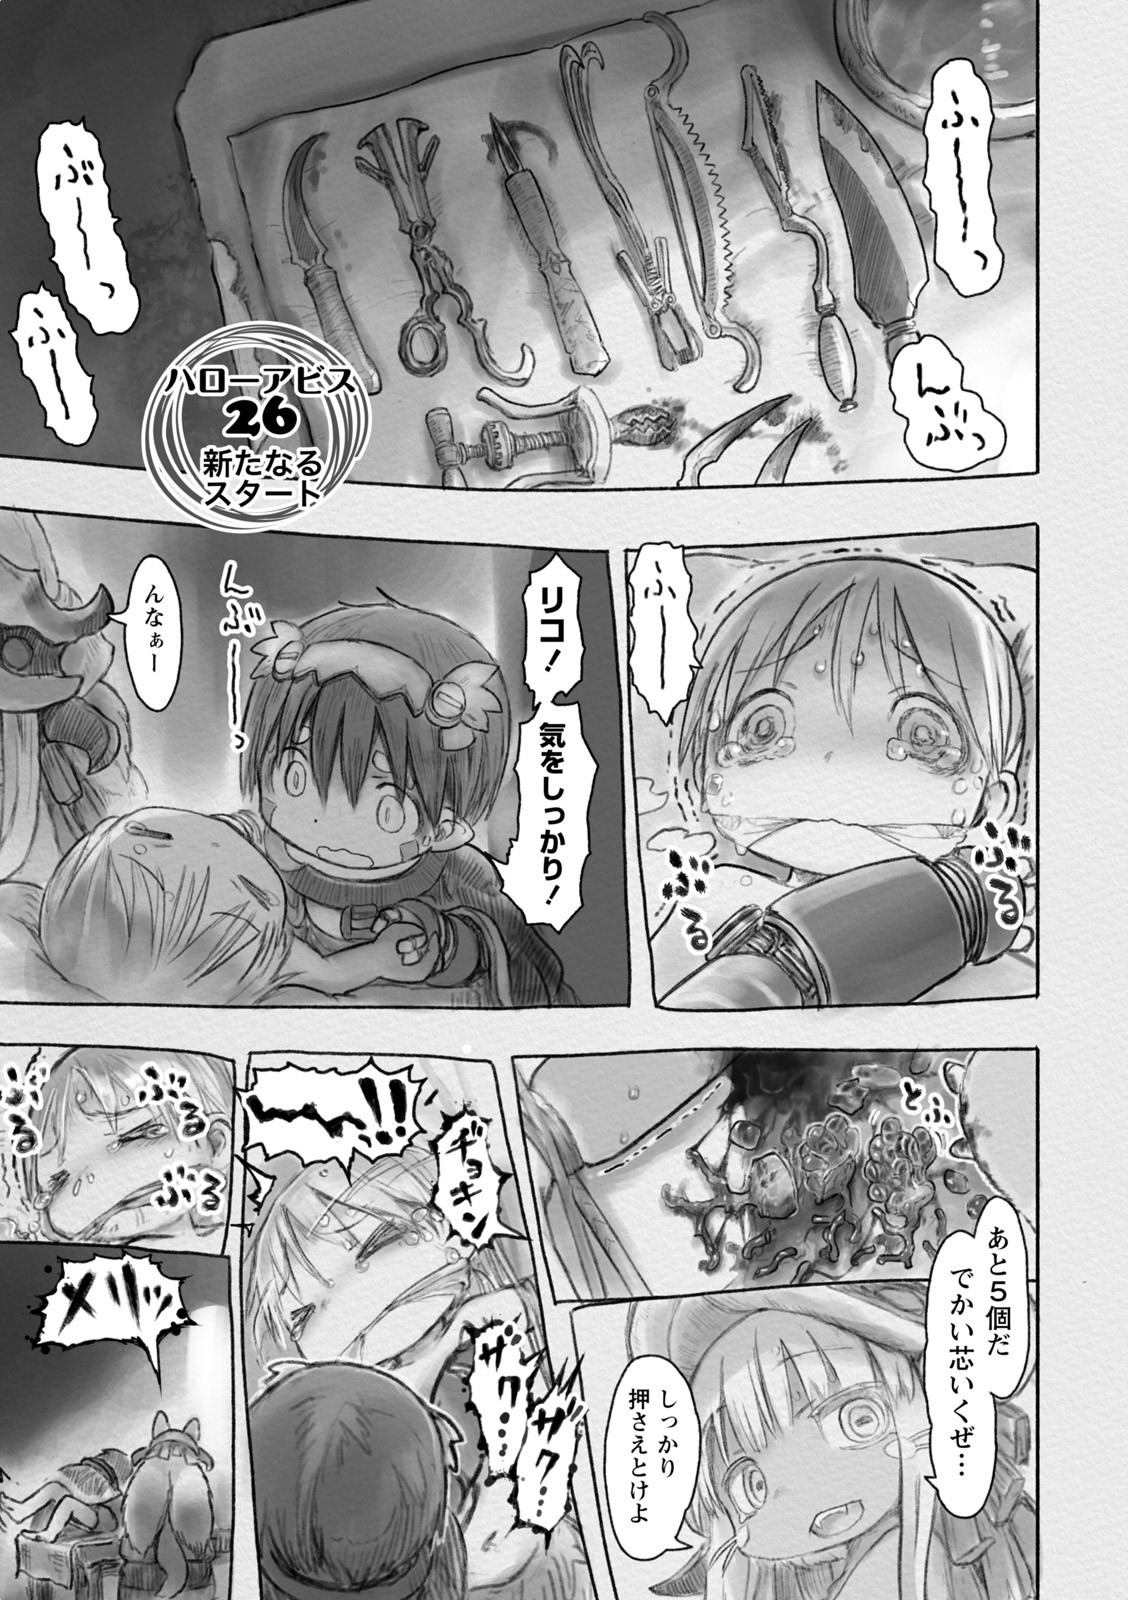 Made in Abyss Chapter 062, Made in Abyss Wiki